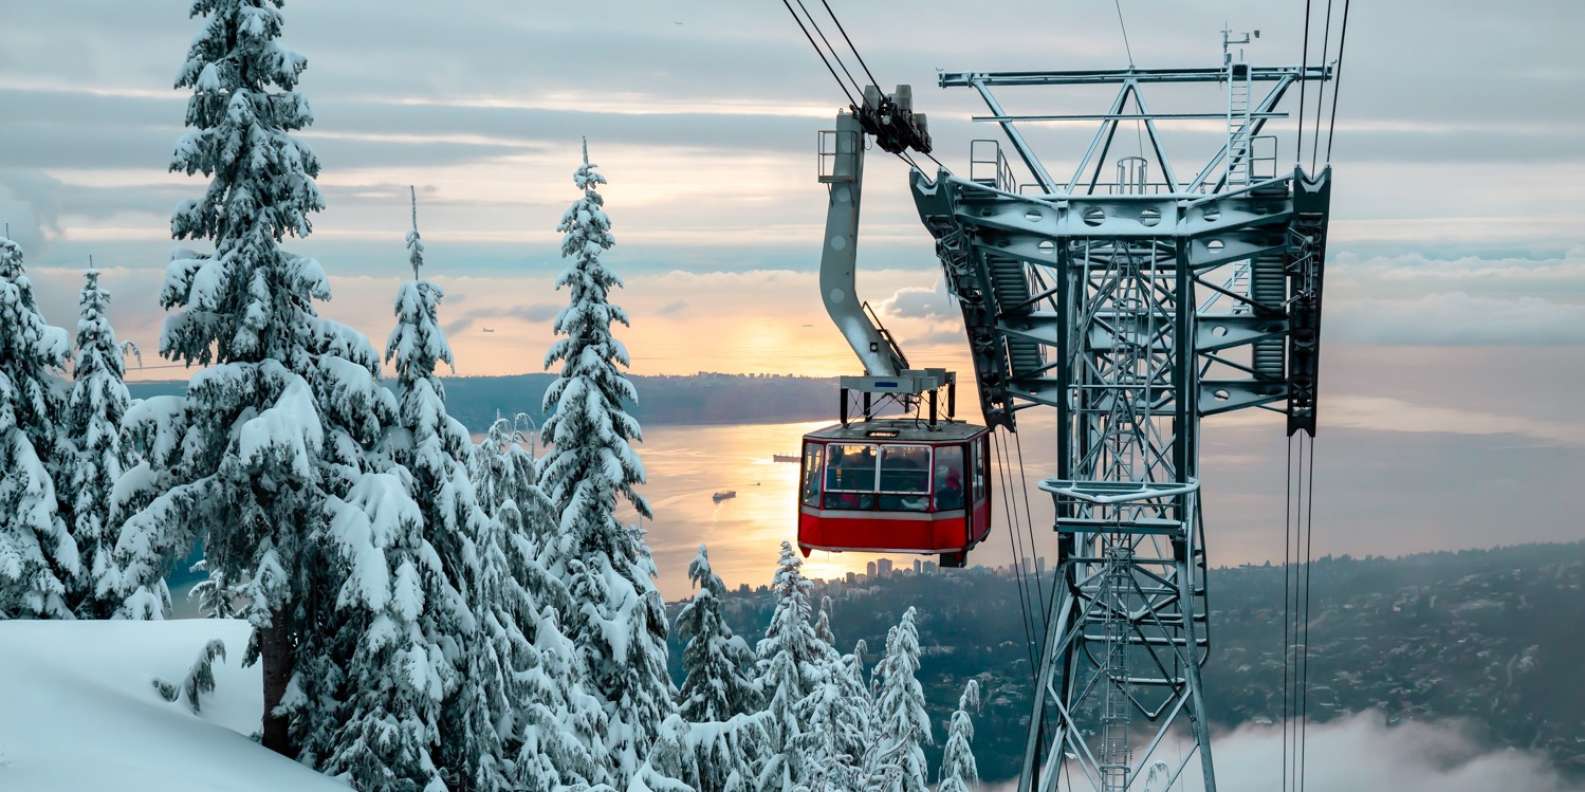 Vancouver: Grouse Mountain Admission Ticket | GetYourGuide